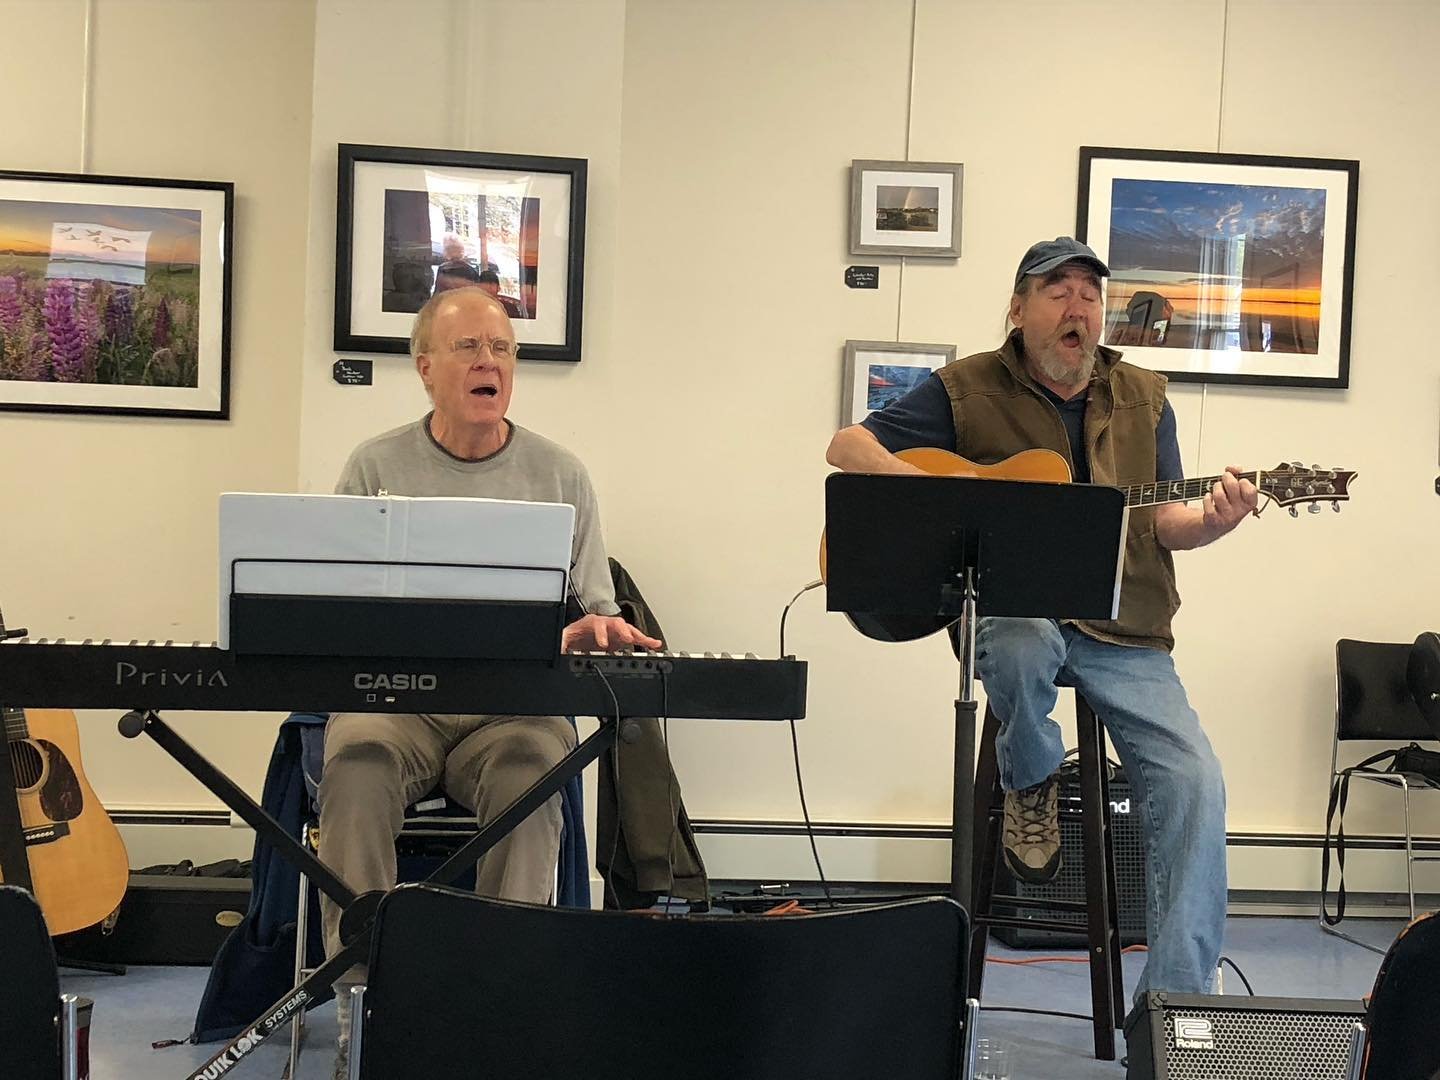 Thank you to everyone who came out and spent a delightful hour with Steve Reuman and Jay Snow yesterday. It was a perfect way to spend a chilly, cloudy afternoon together!

Next Saturday it&rsquo;s the wonderful Stephen Russell! 

#livemusic #communi